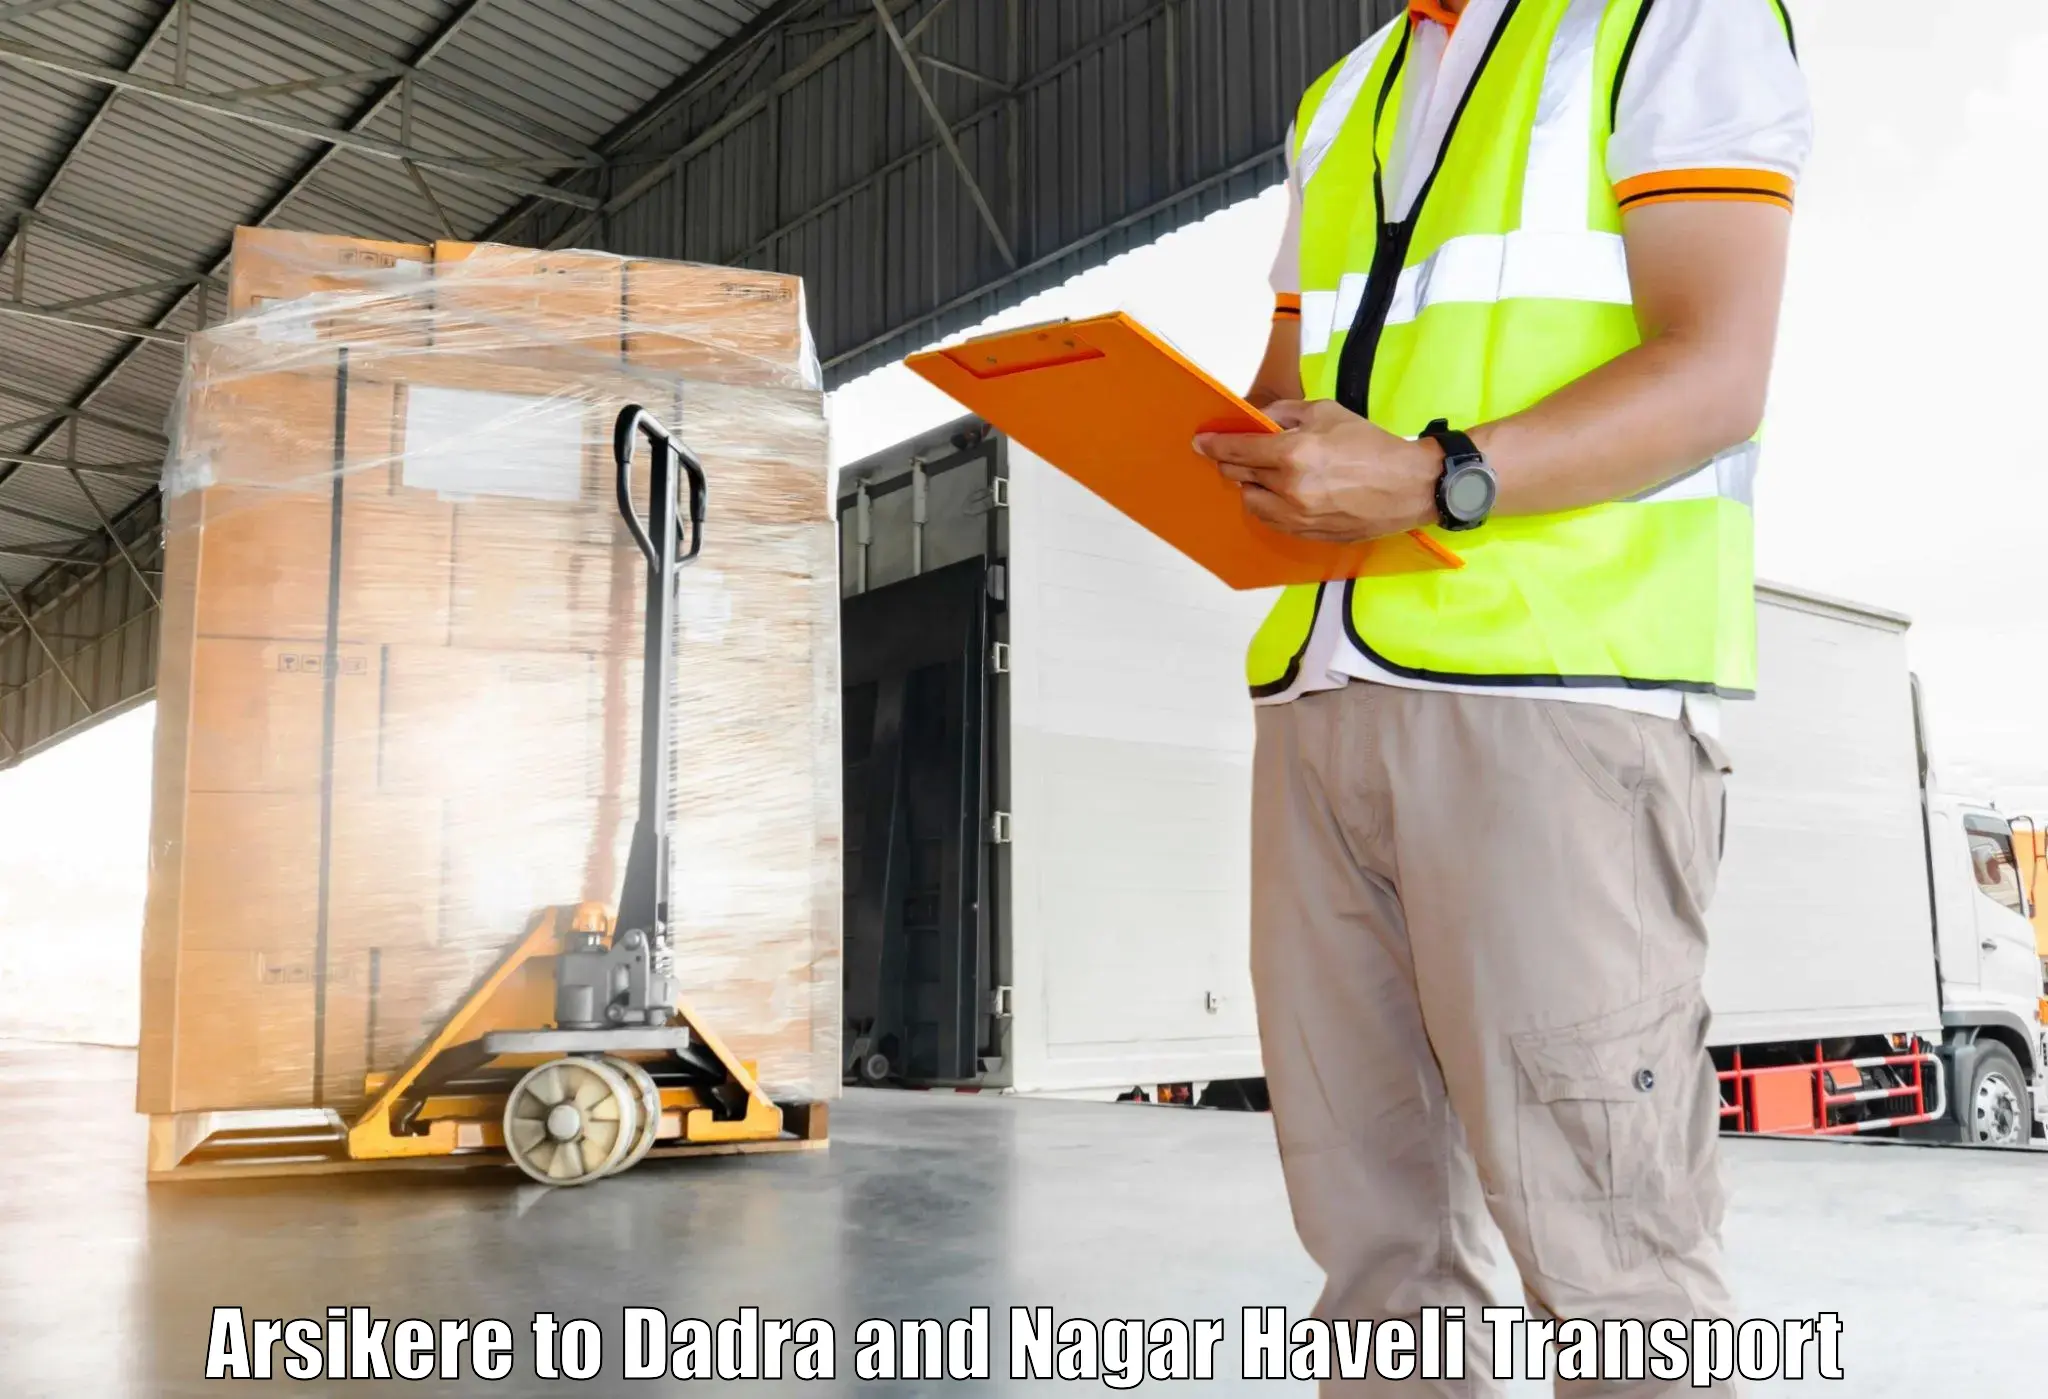 Land transport services Arsikere to Dadra and Nagar Haveli